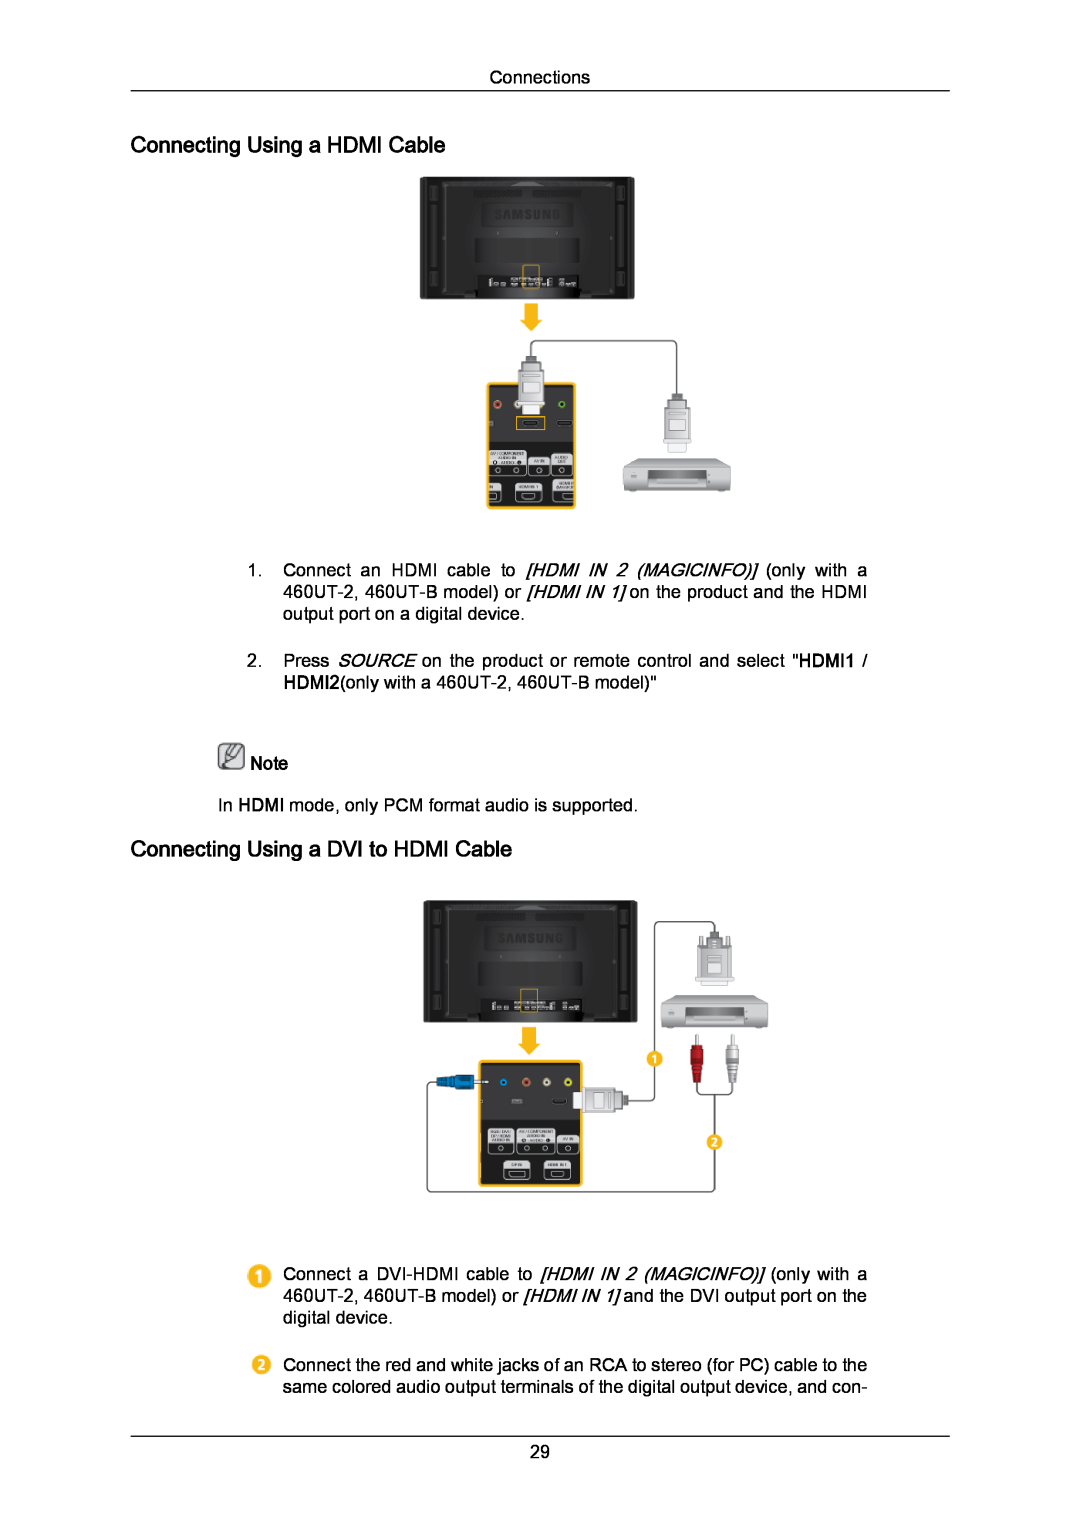 Samsung 460UT-B, 460UTN-B, 460UTN-2, 460UT-2 user manual Connecting Using a HDMI Cable, Connecting Using a DVI to HDMI Cable 